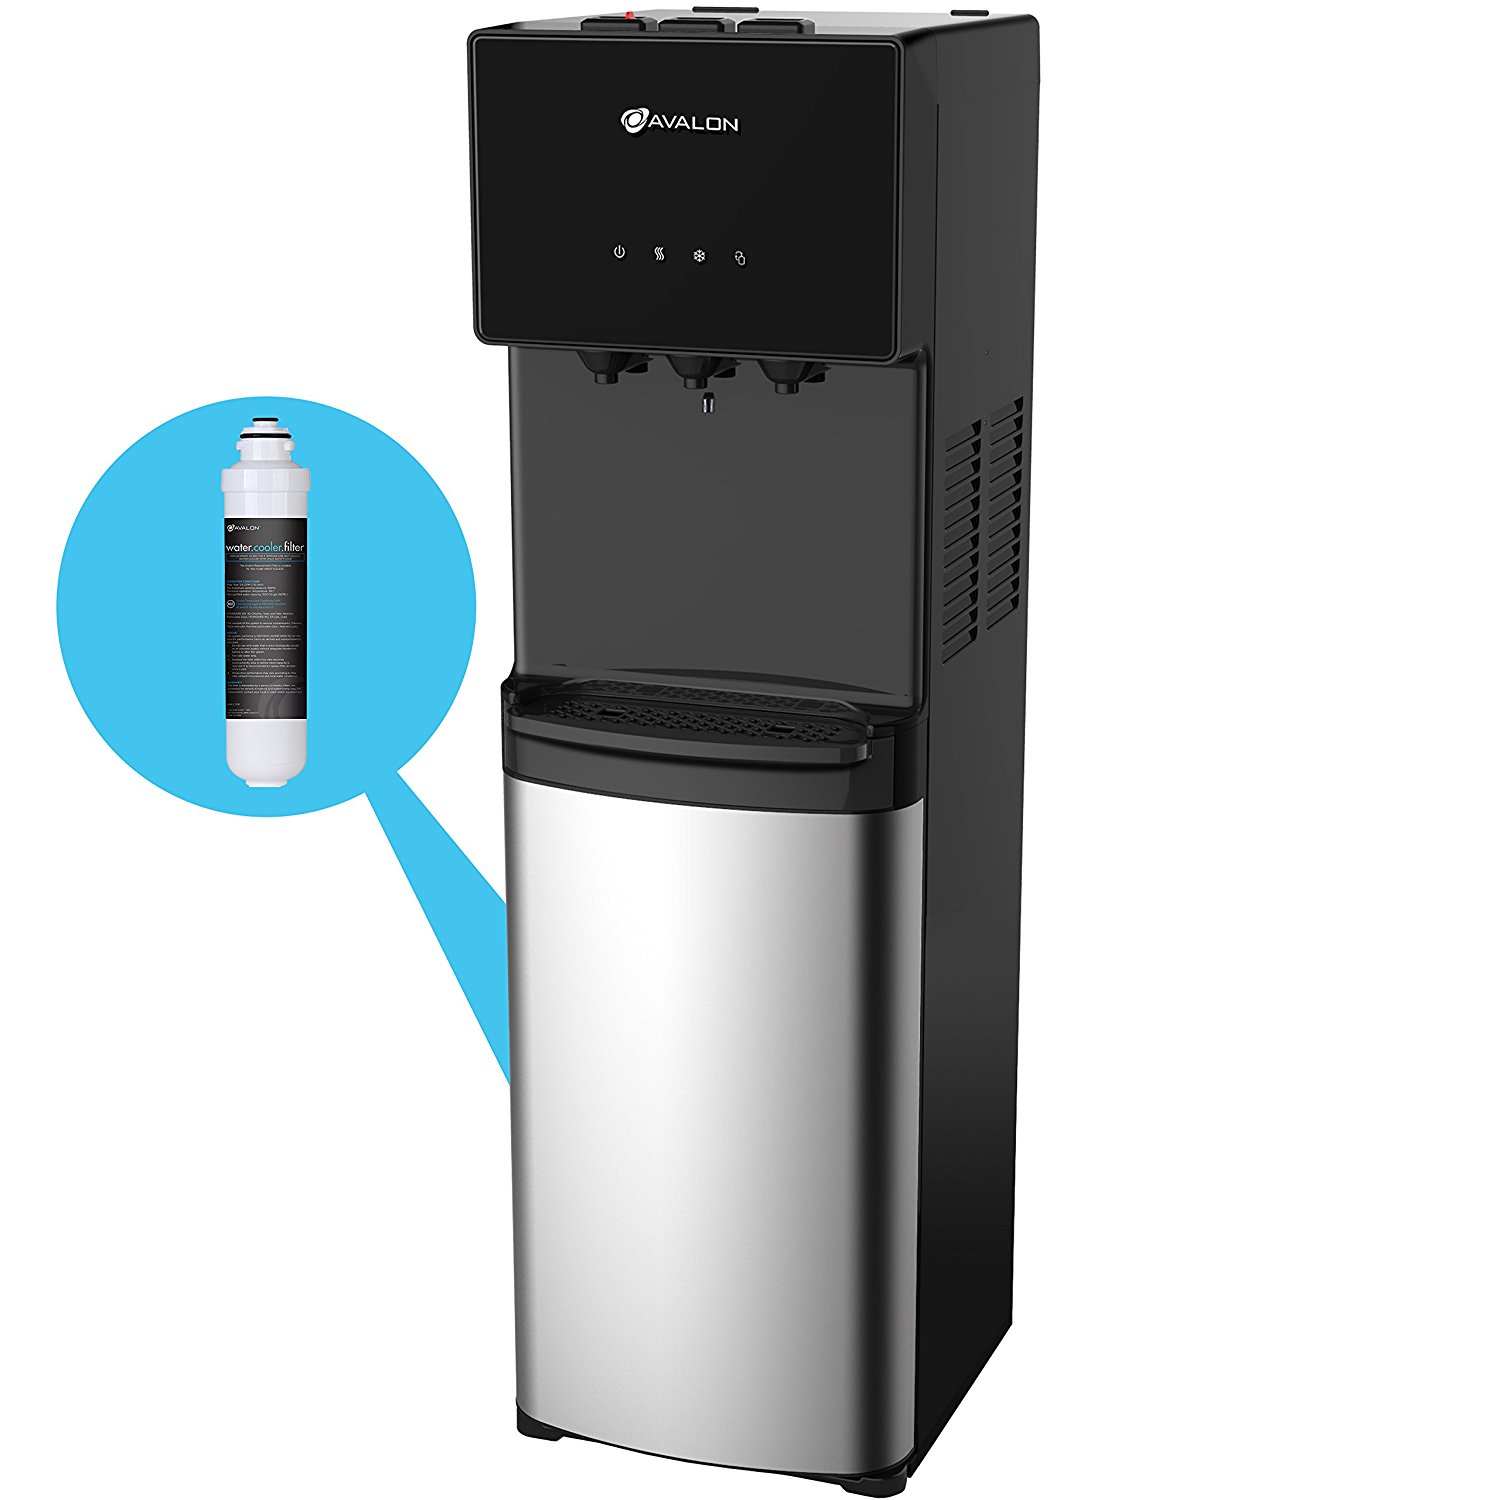 Avalon Limited Edition Self Cleaning Water Cooler Water Dispenser 3 Temperature Settings Hot